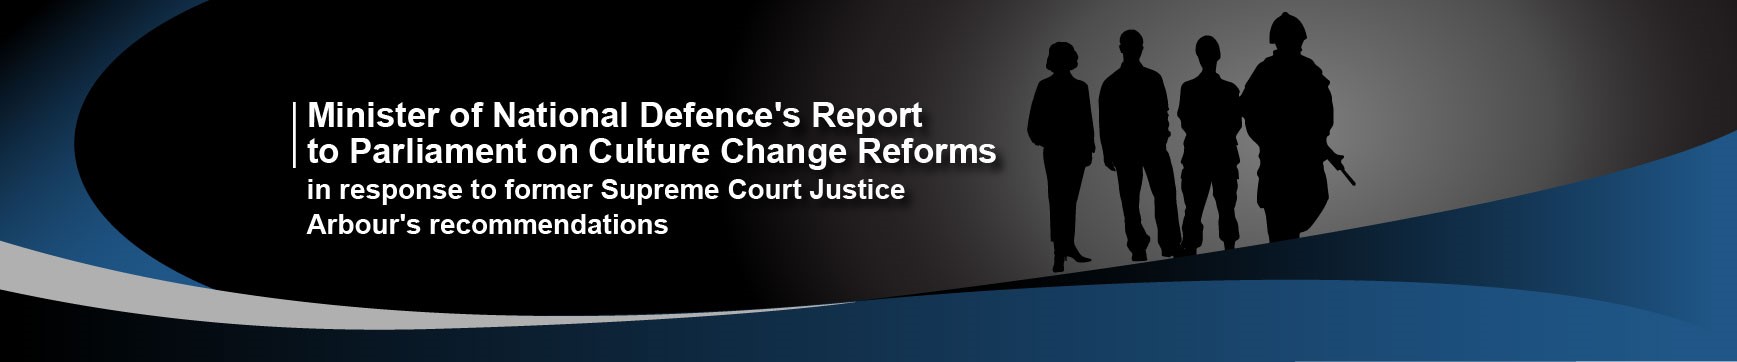 Culture Change Reforms in response to former Supreme Court Justice Arbour’s recommendations